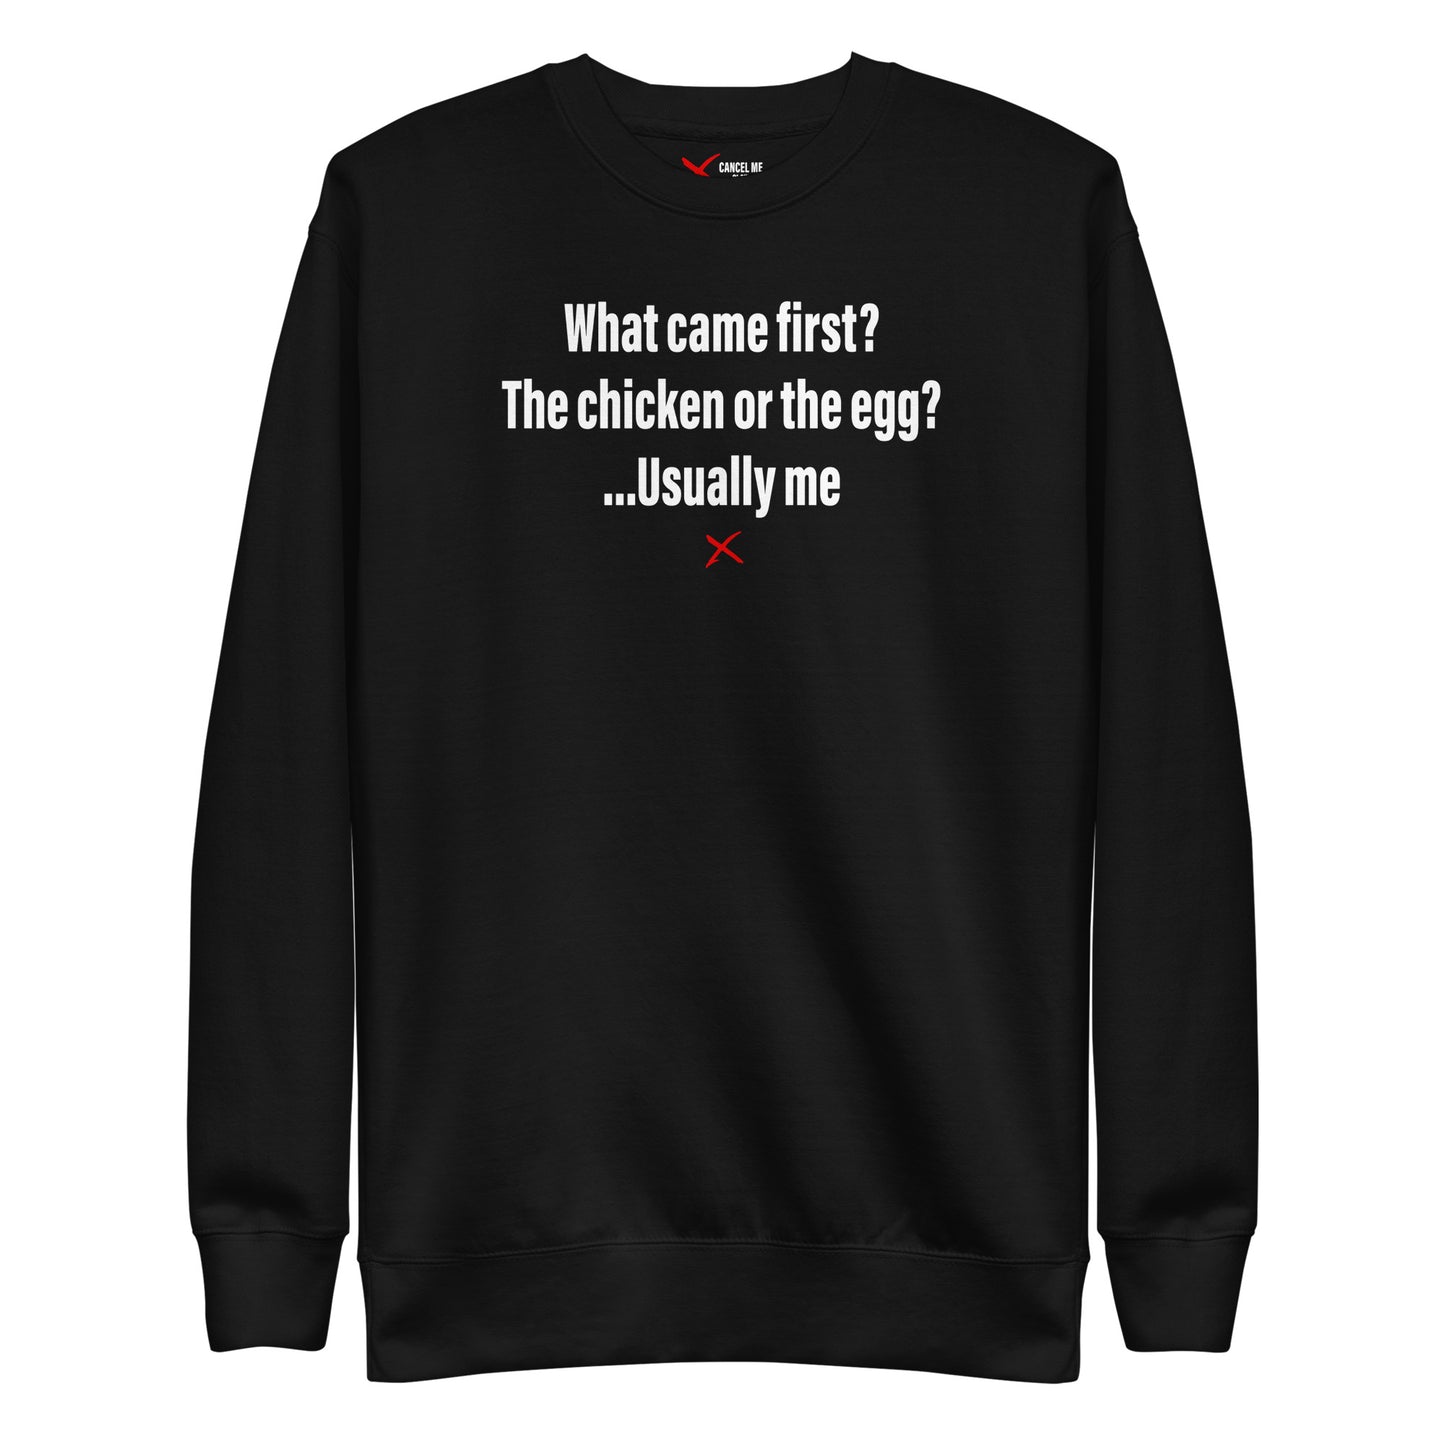 What came first? The chicken or the egg? ...Usually me - Sweatshirt